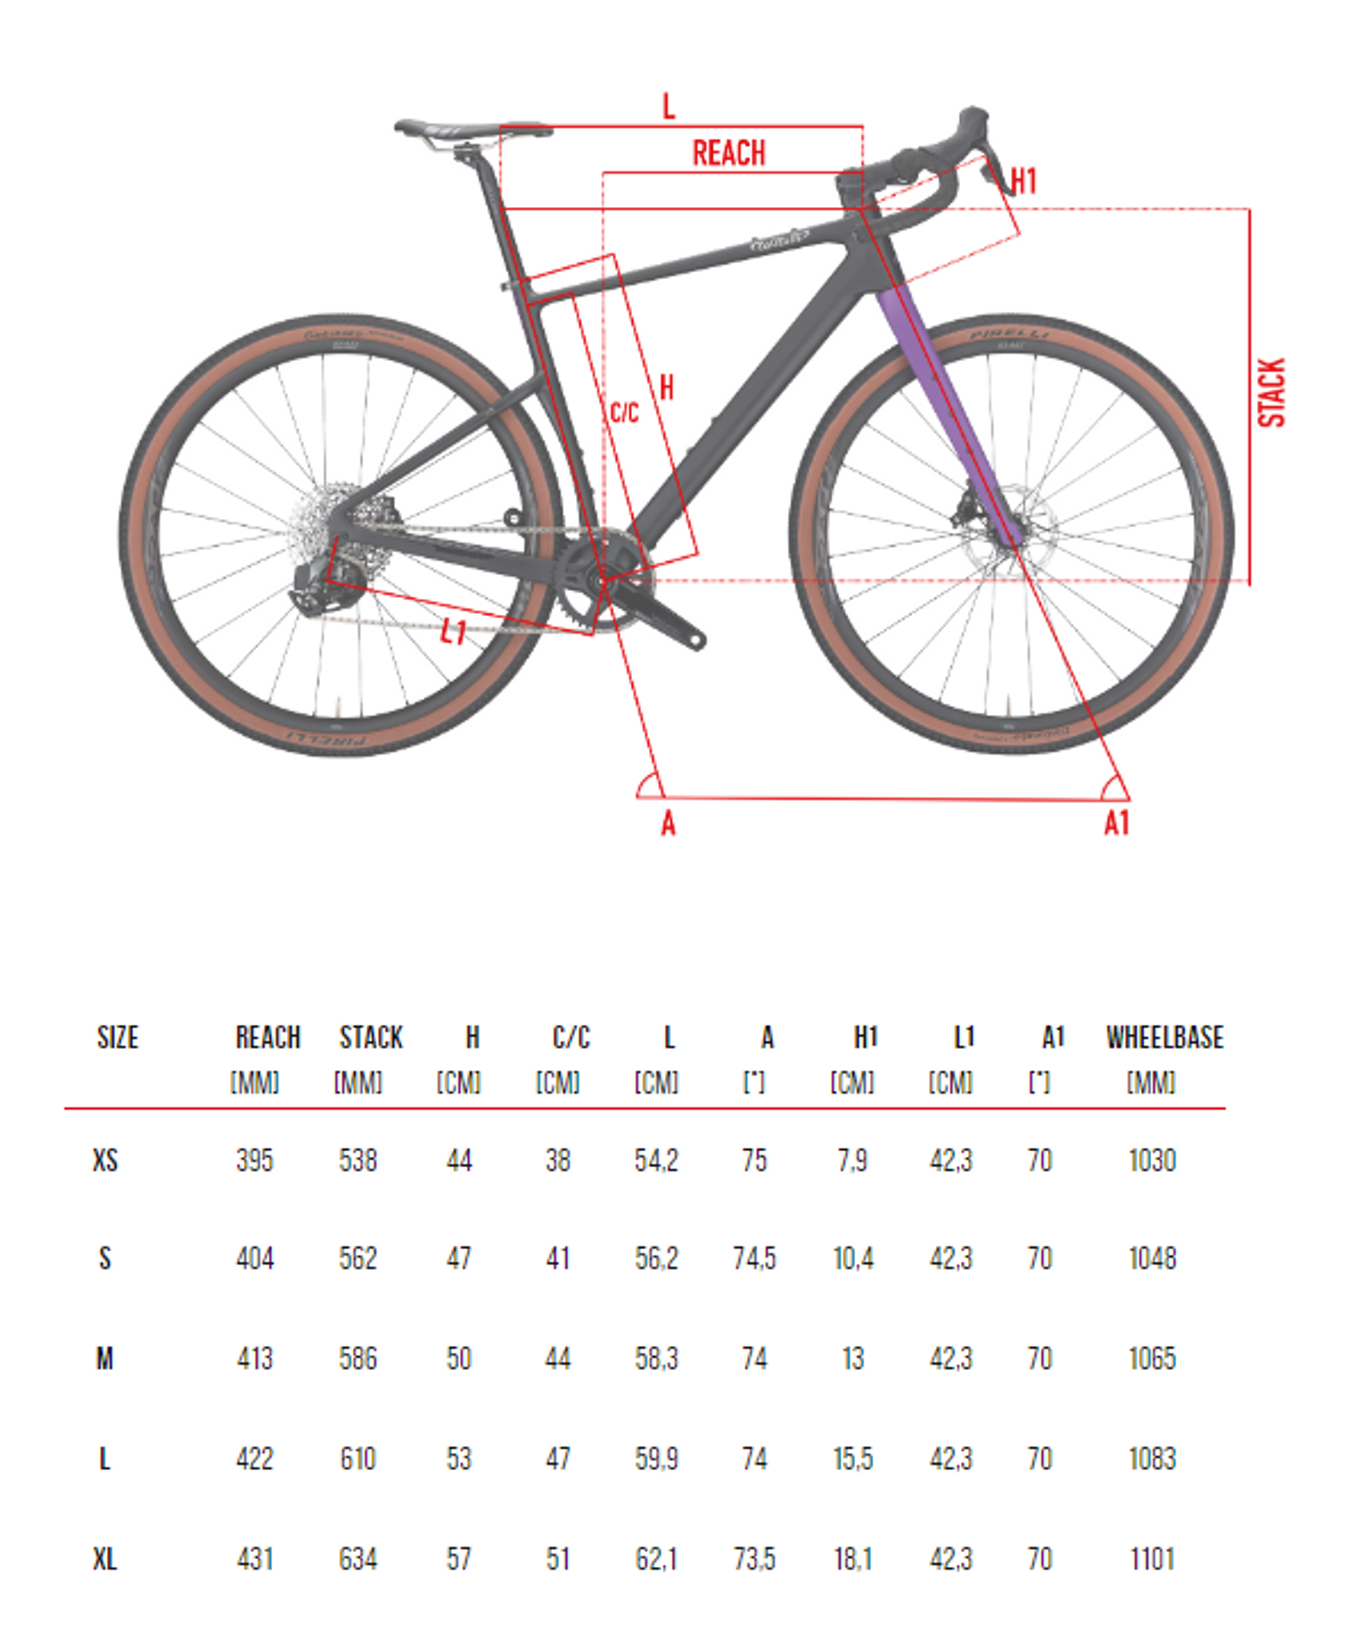 Wilier have approached the Adlar with geometry more inline with a mountain bike than a road bike as you can see from the geometry chart the reach for each model is longer than usual for a gravel bike